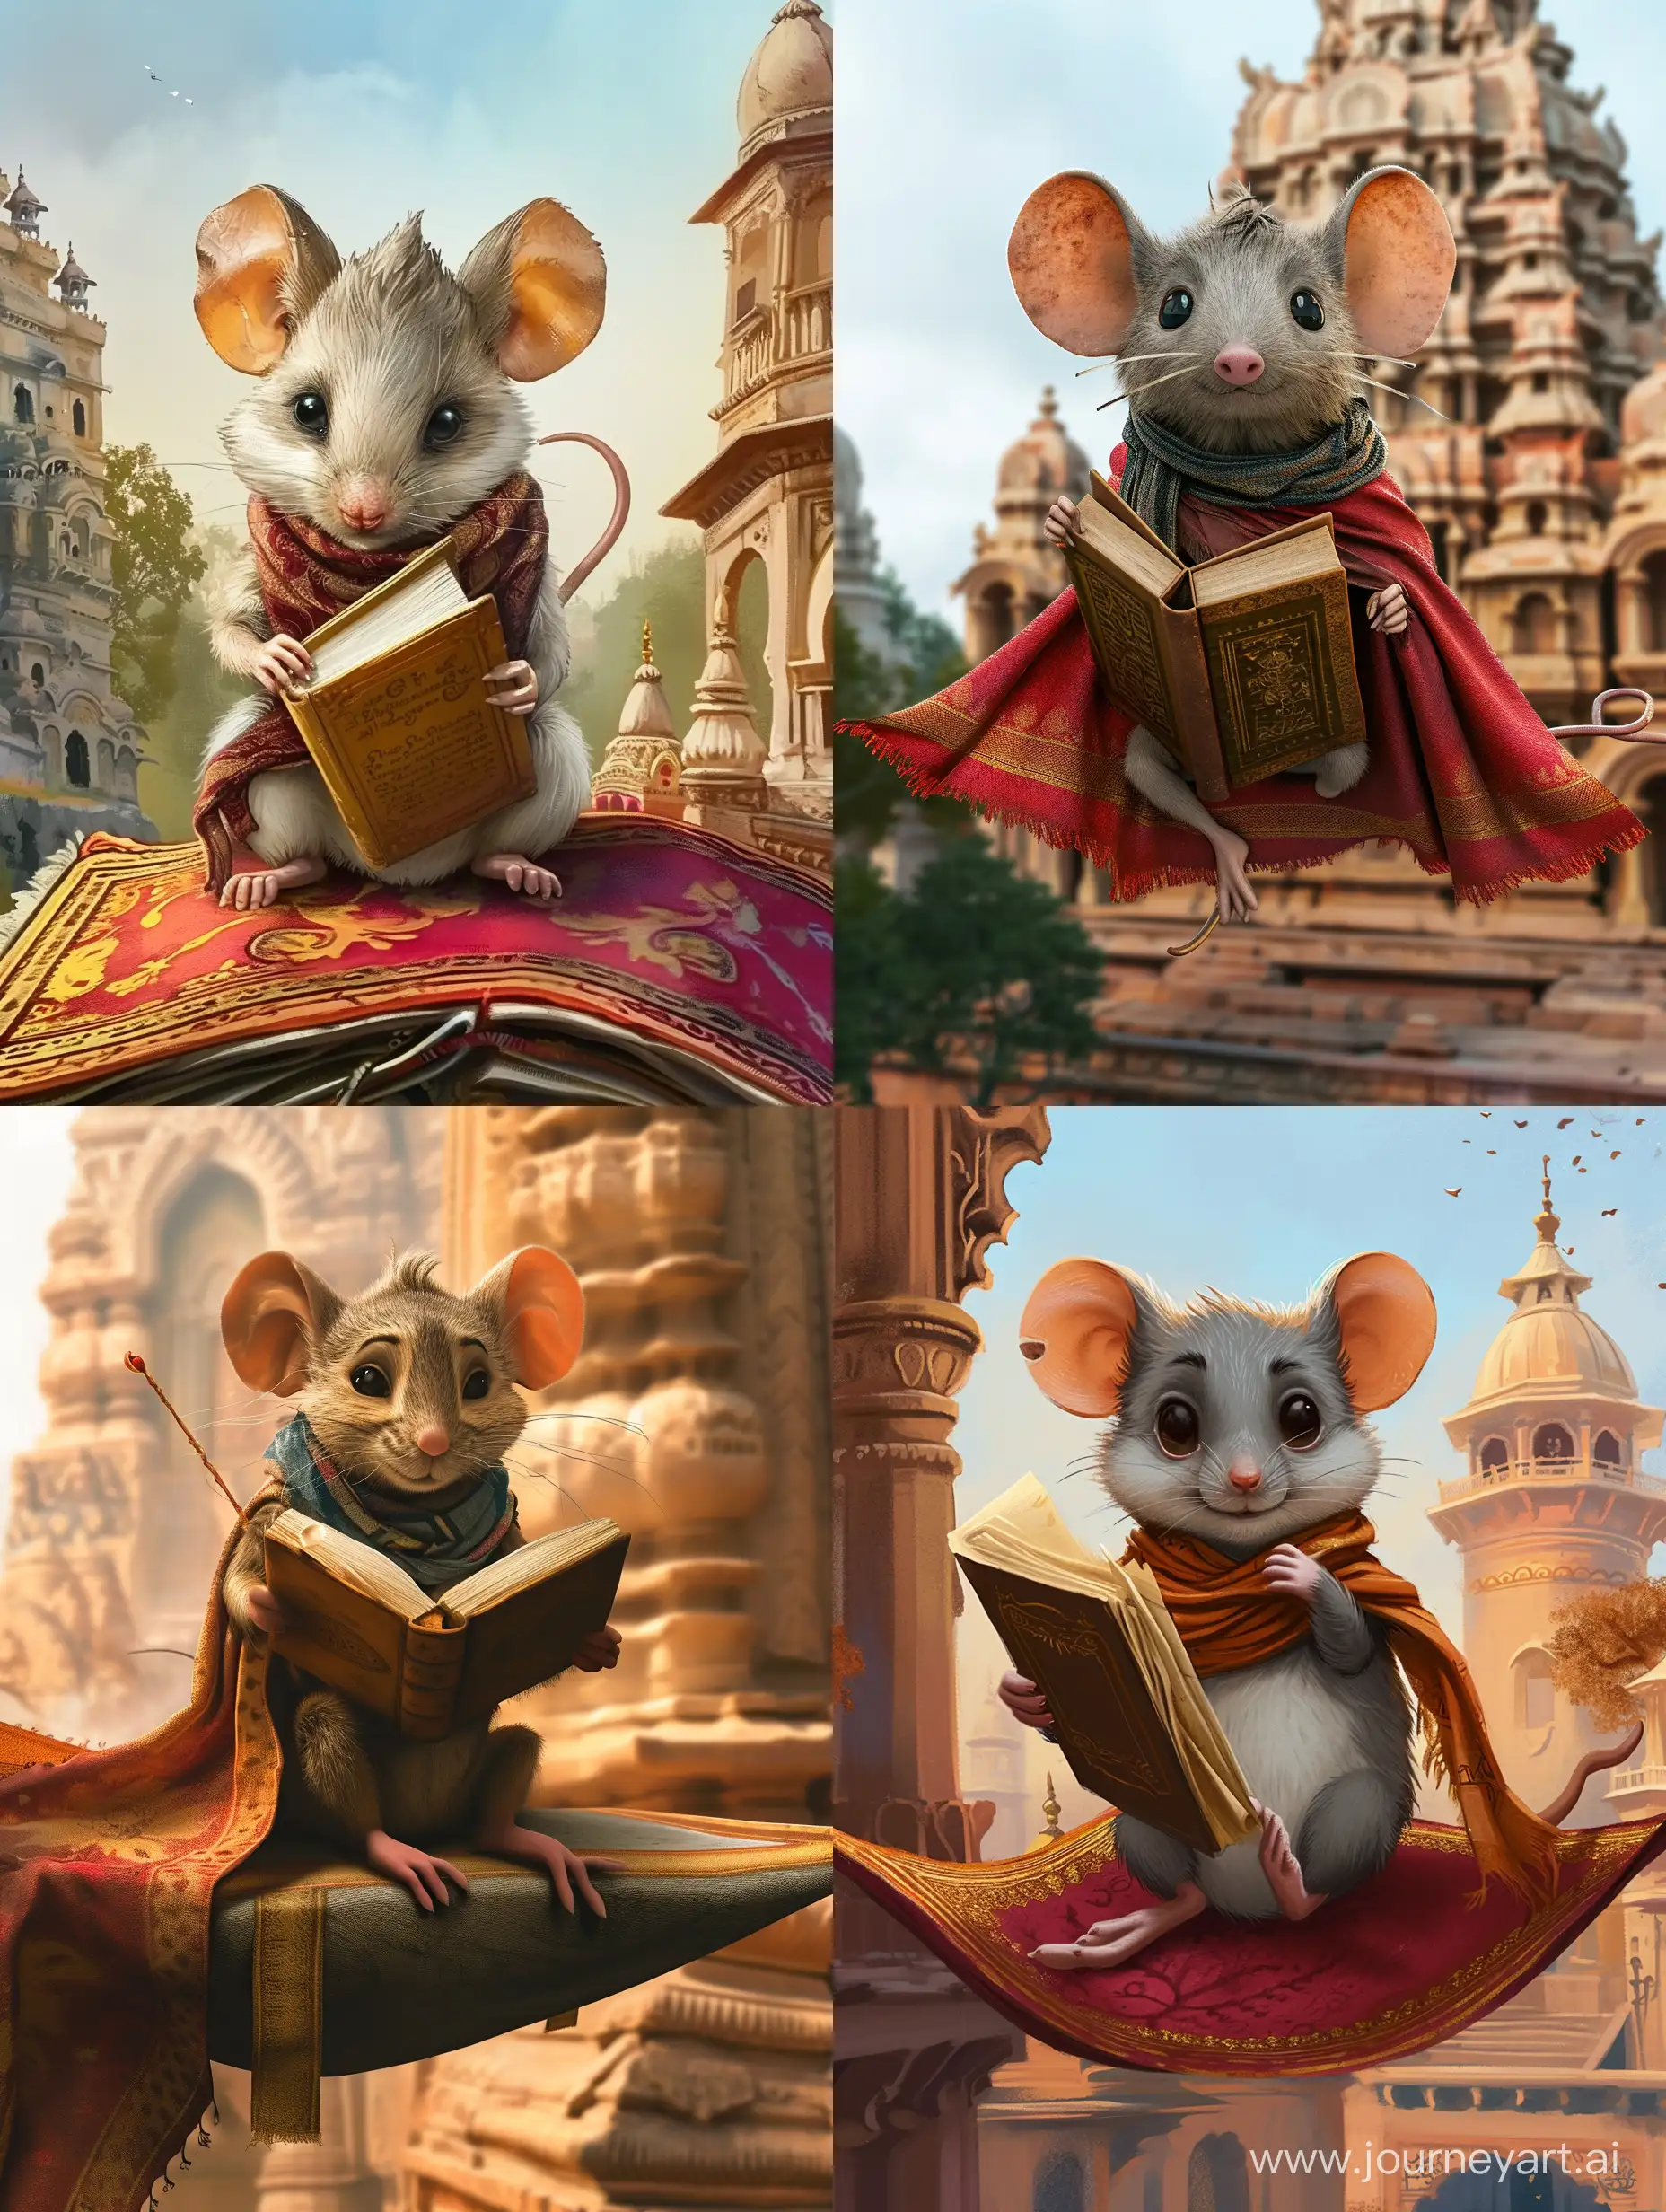 mouse detective on flying carpet holding book and scarf on neck

location: temple in india